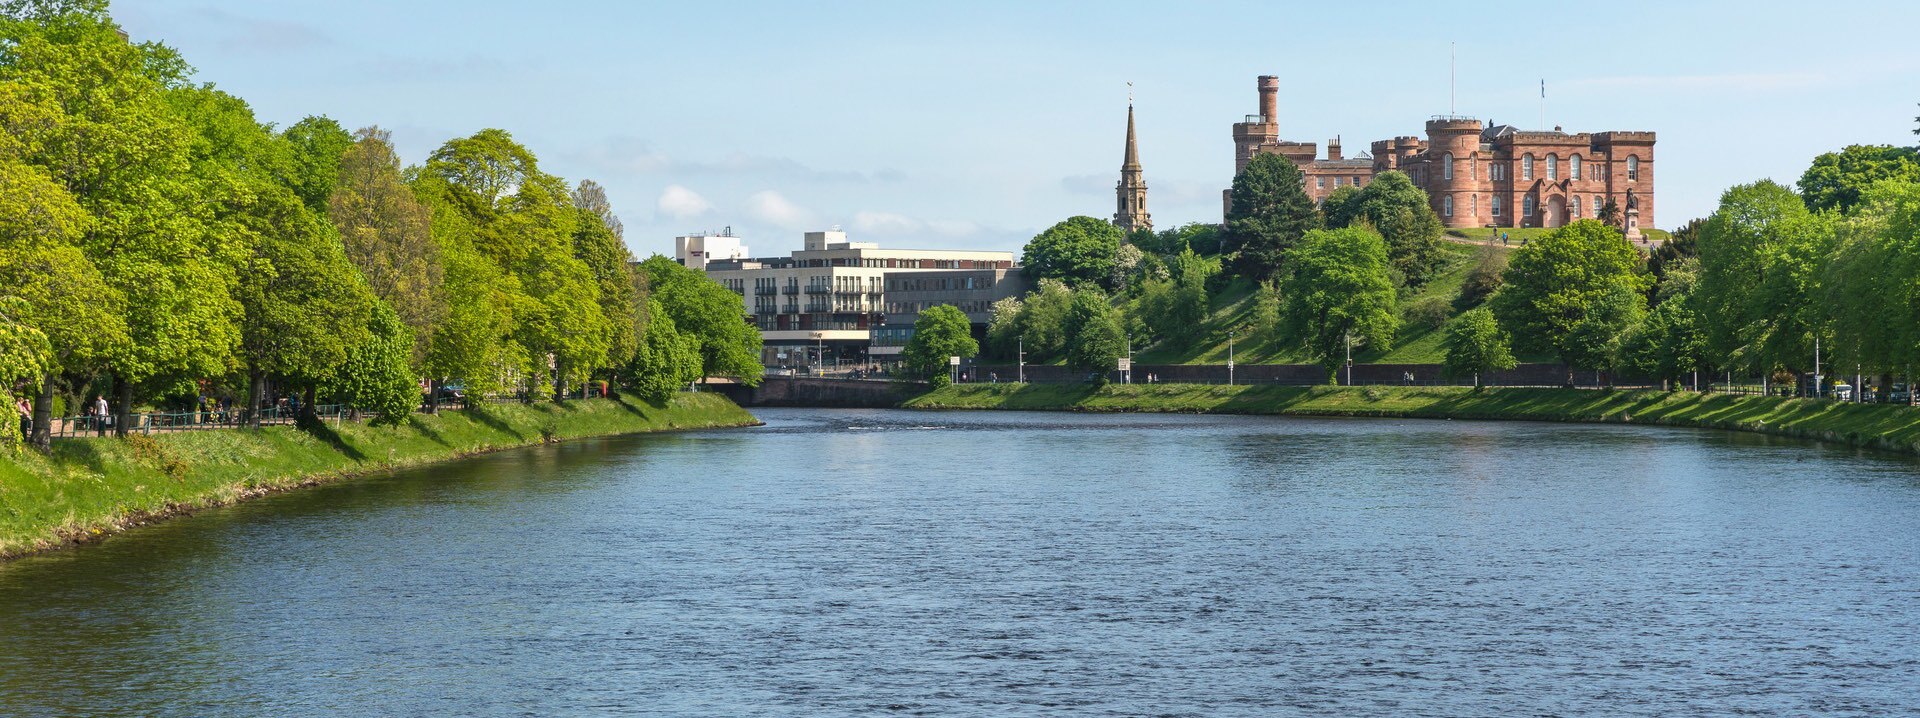 Looking over the River Ness to the buildings of Inverness behind, trees on either side